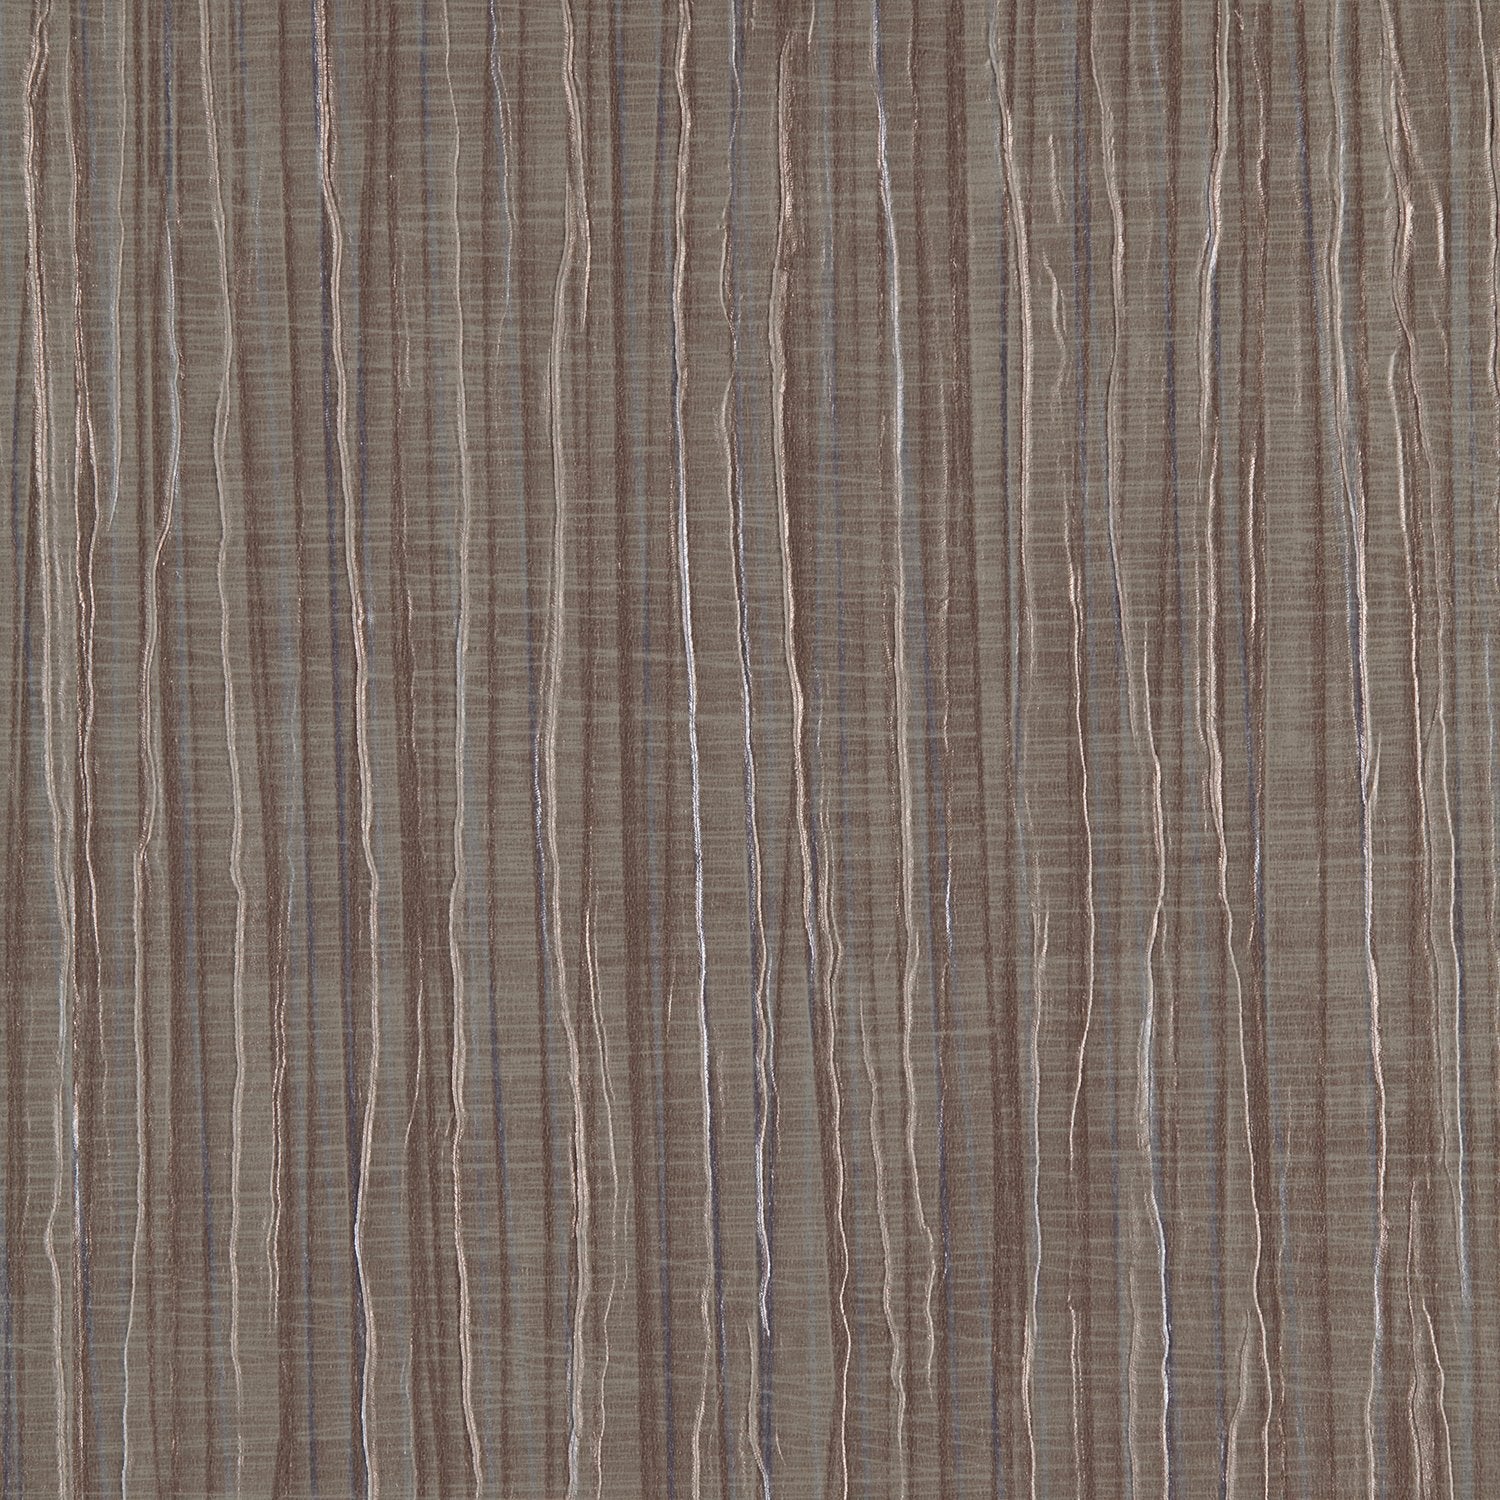 Vogue Pleat - Y47024 - Wallcovering - Vycon - Kube Contract